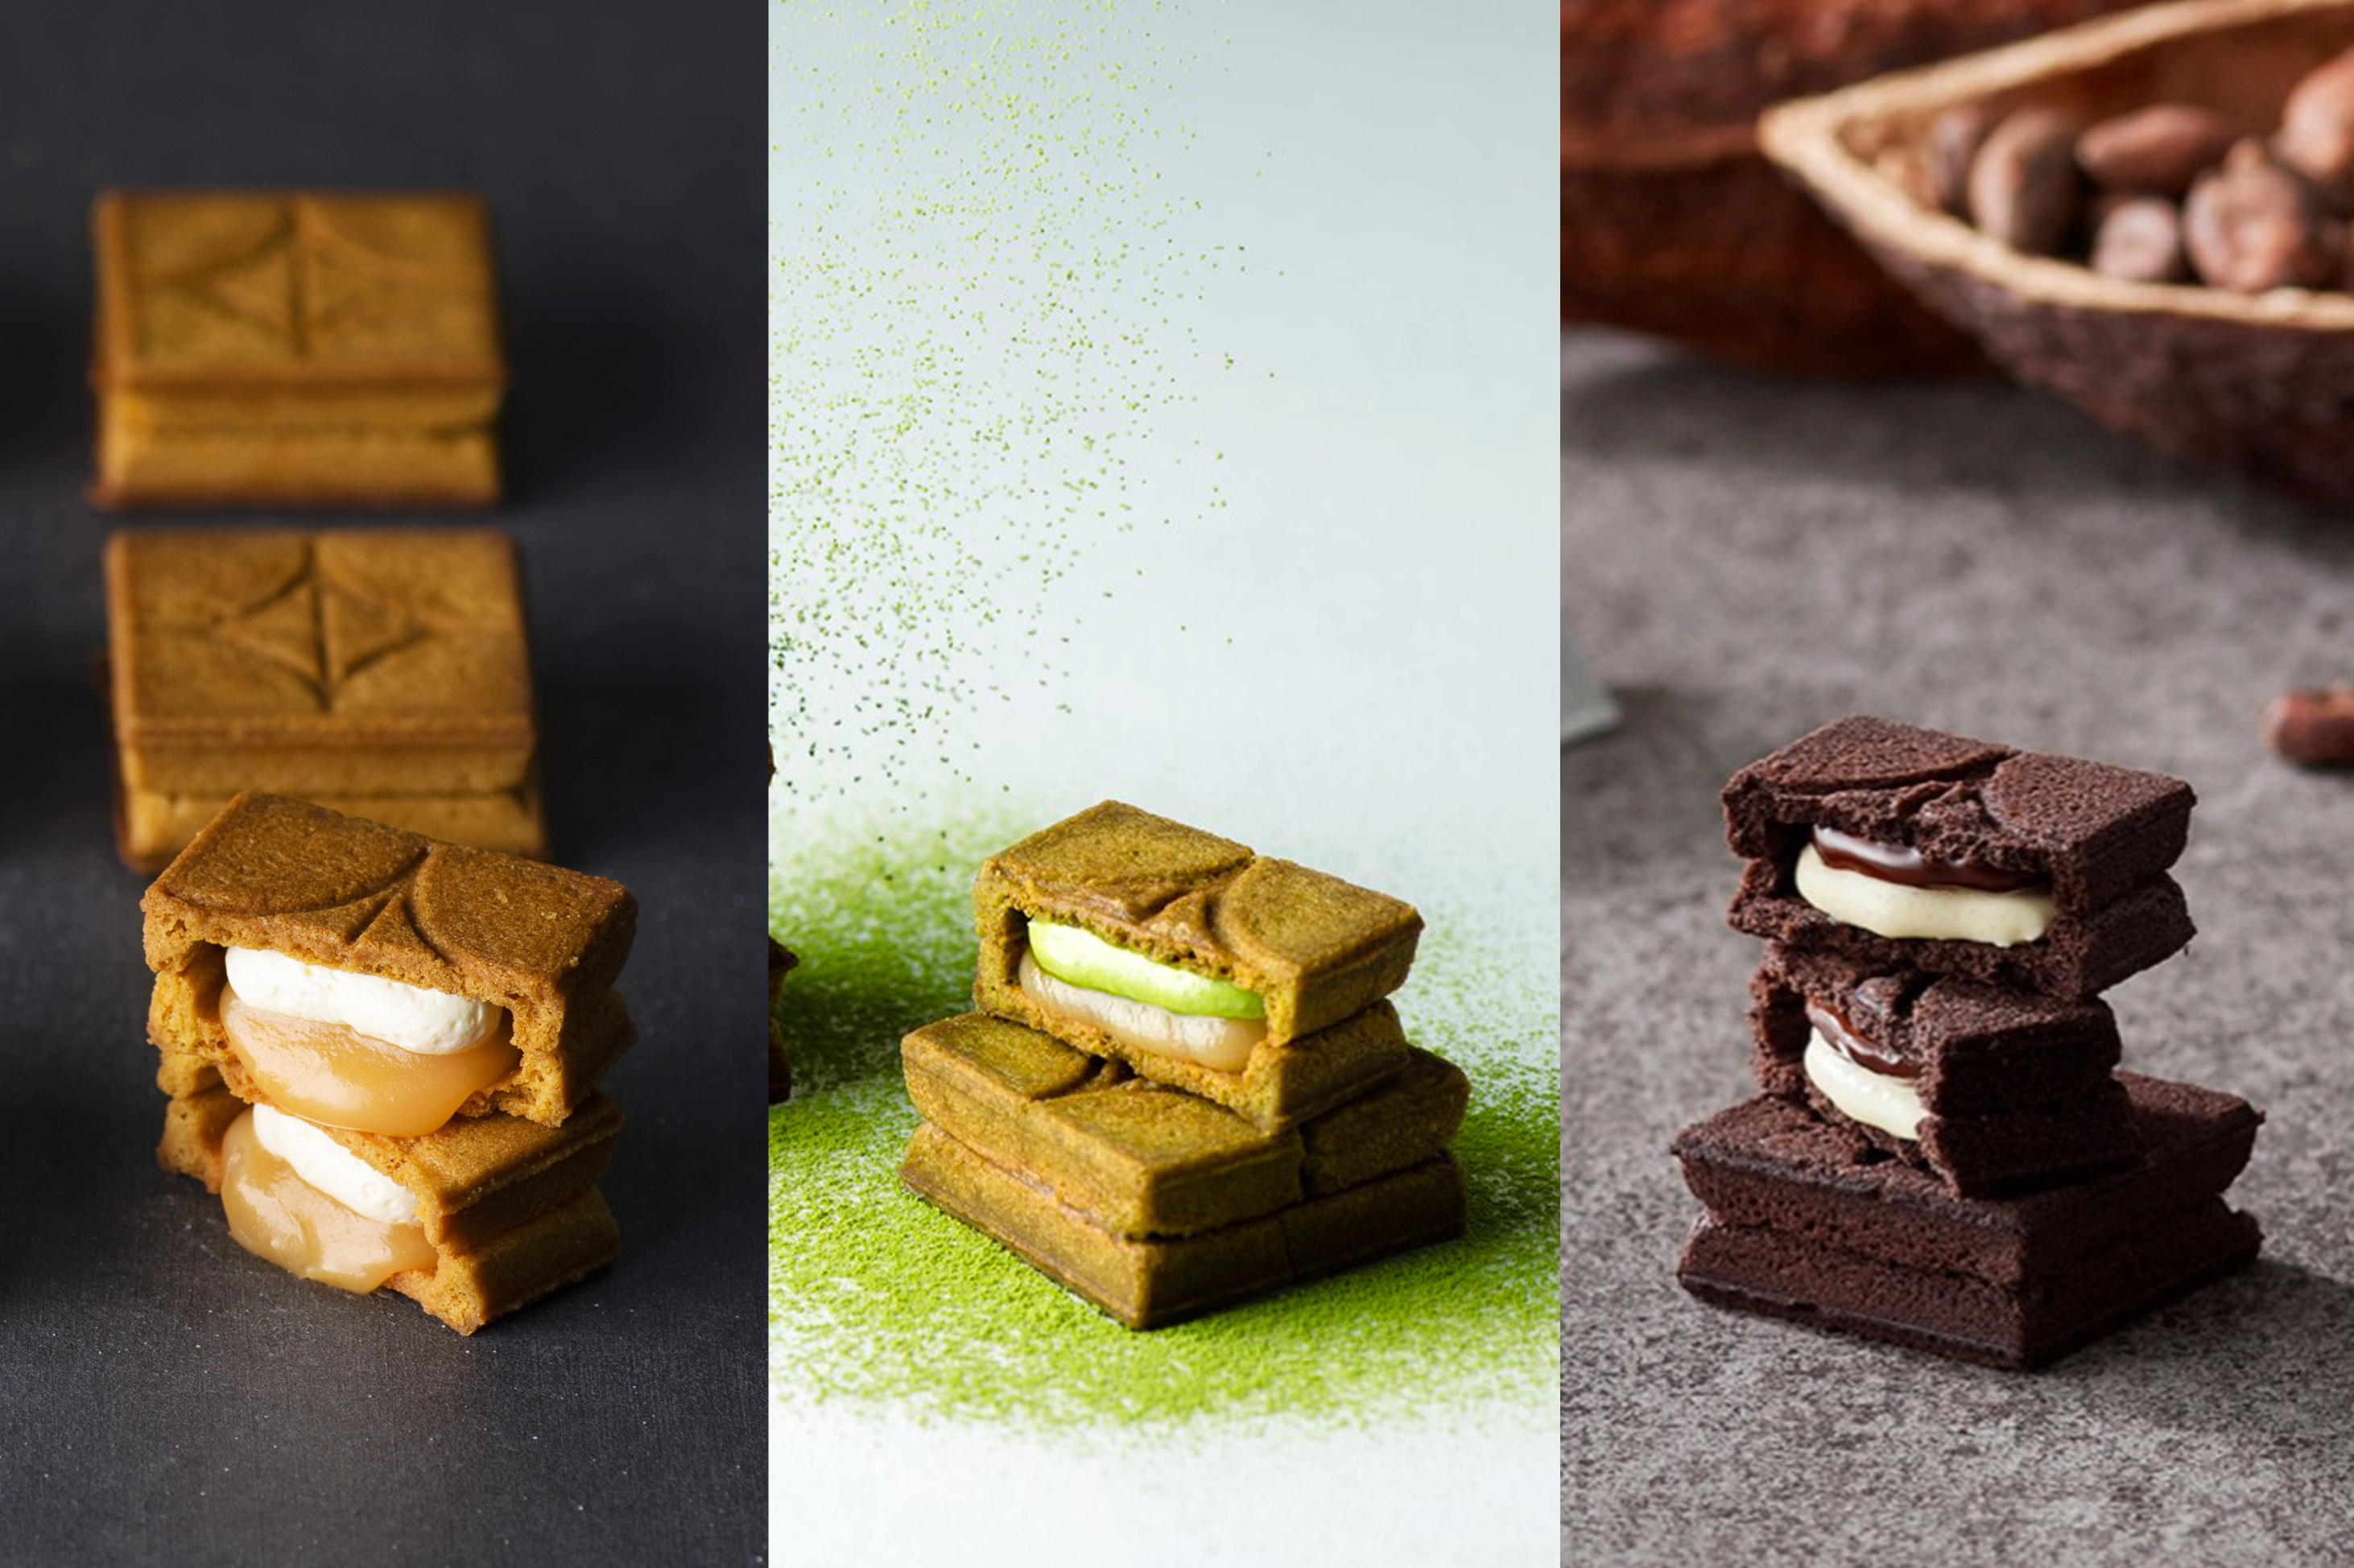 Original, Uji Matcha, and Chocolate – each with its unique double-layered filling.